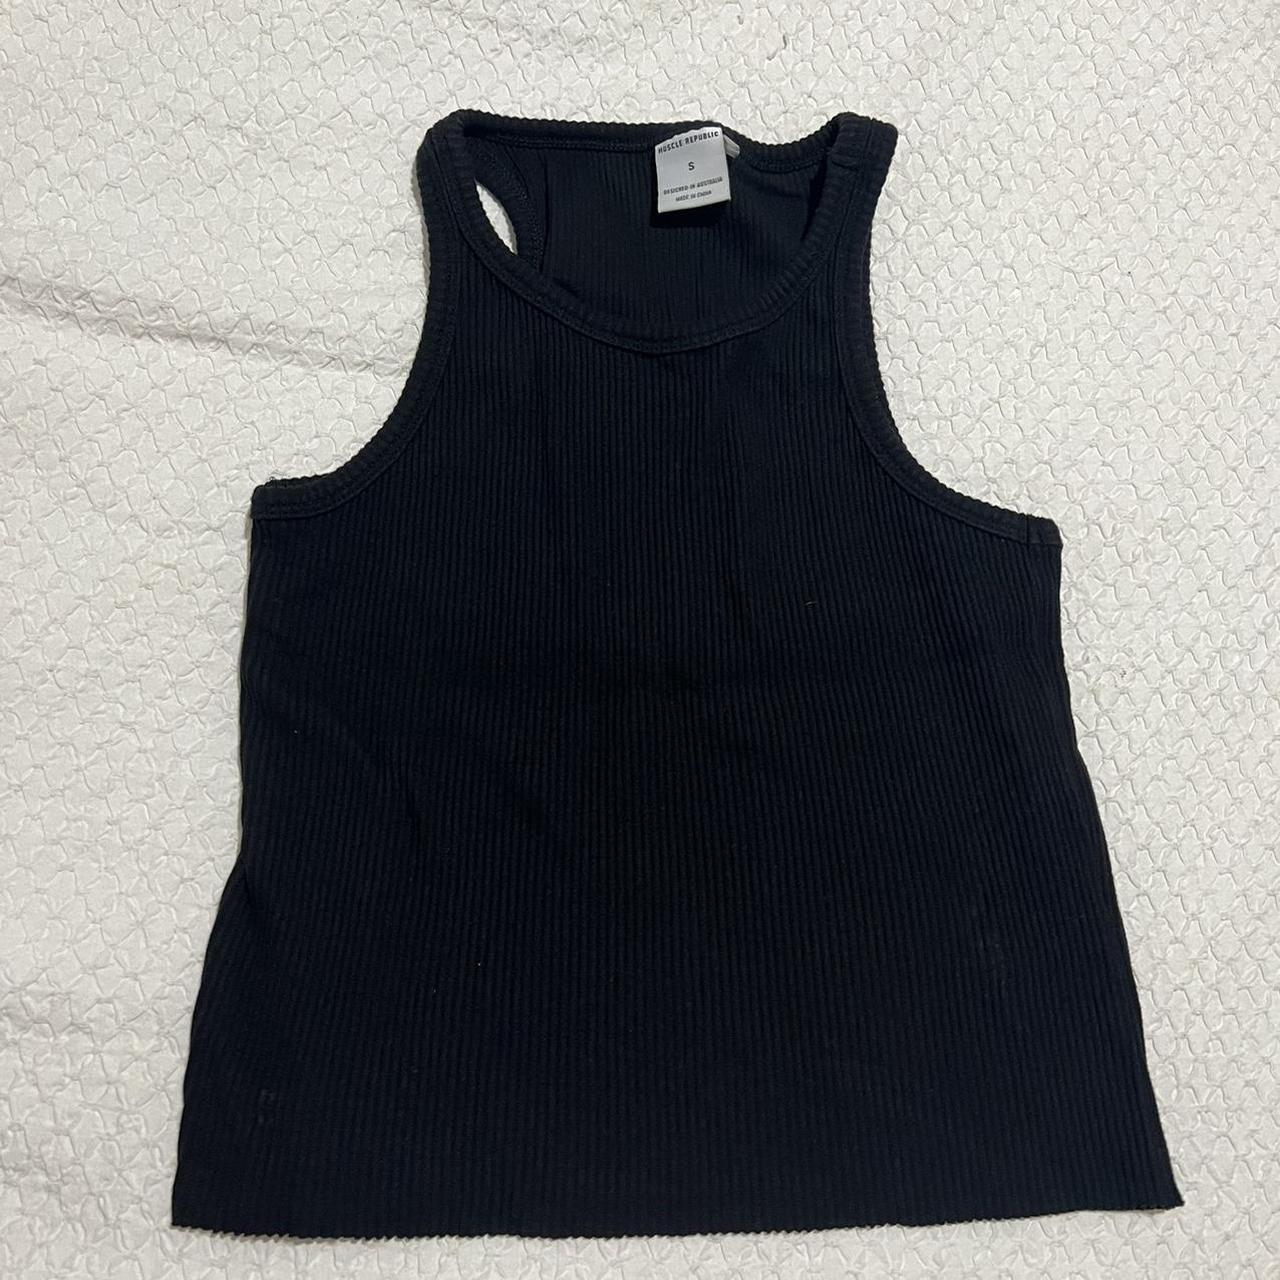 Muscle Republic ribbed singlet in black Size small... - Depop